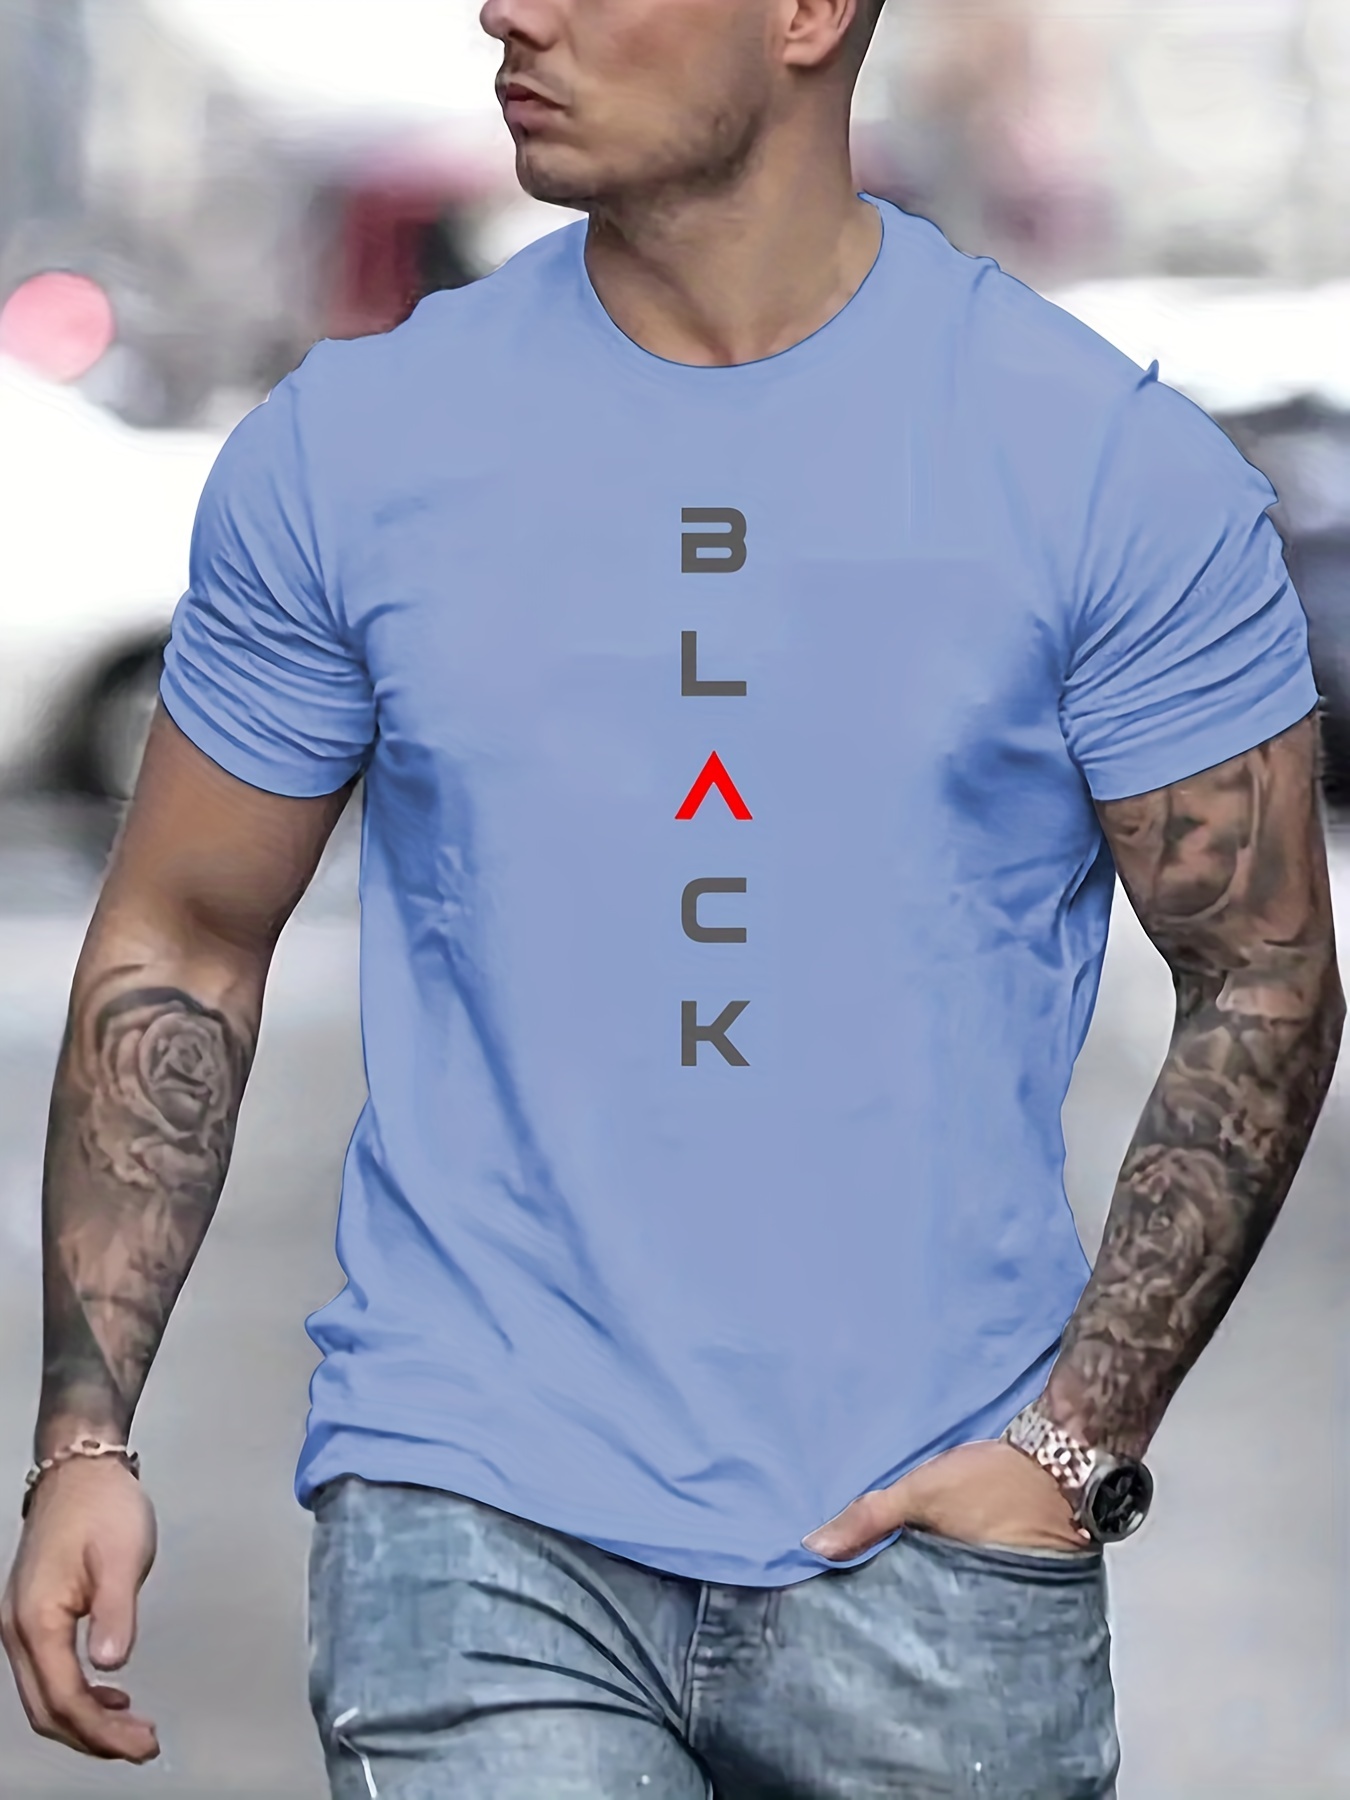 black print tee shirt tee for men casual short sleeve t shirt for summer spring fall tops as gifts details 10